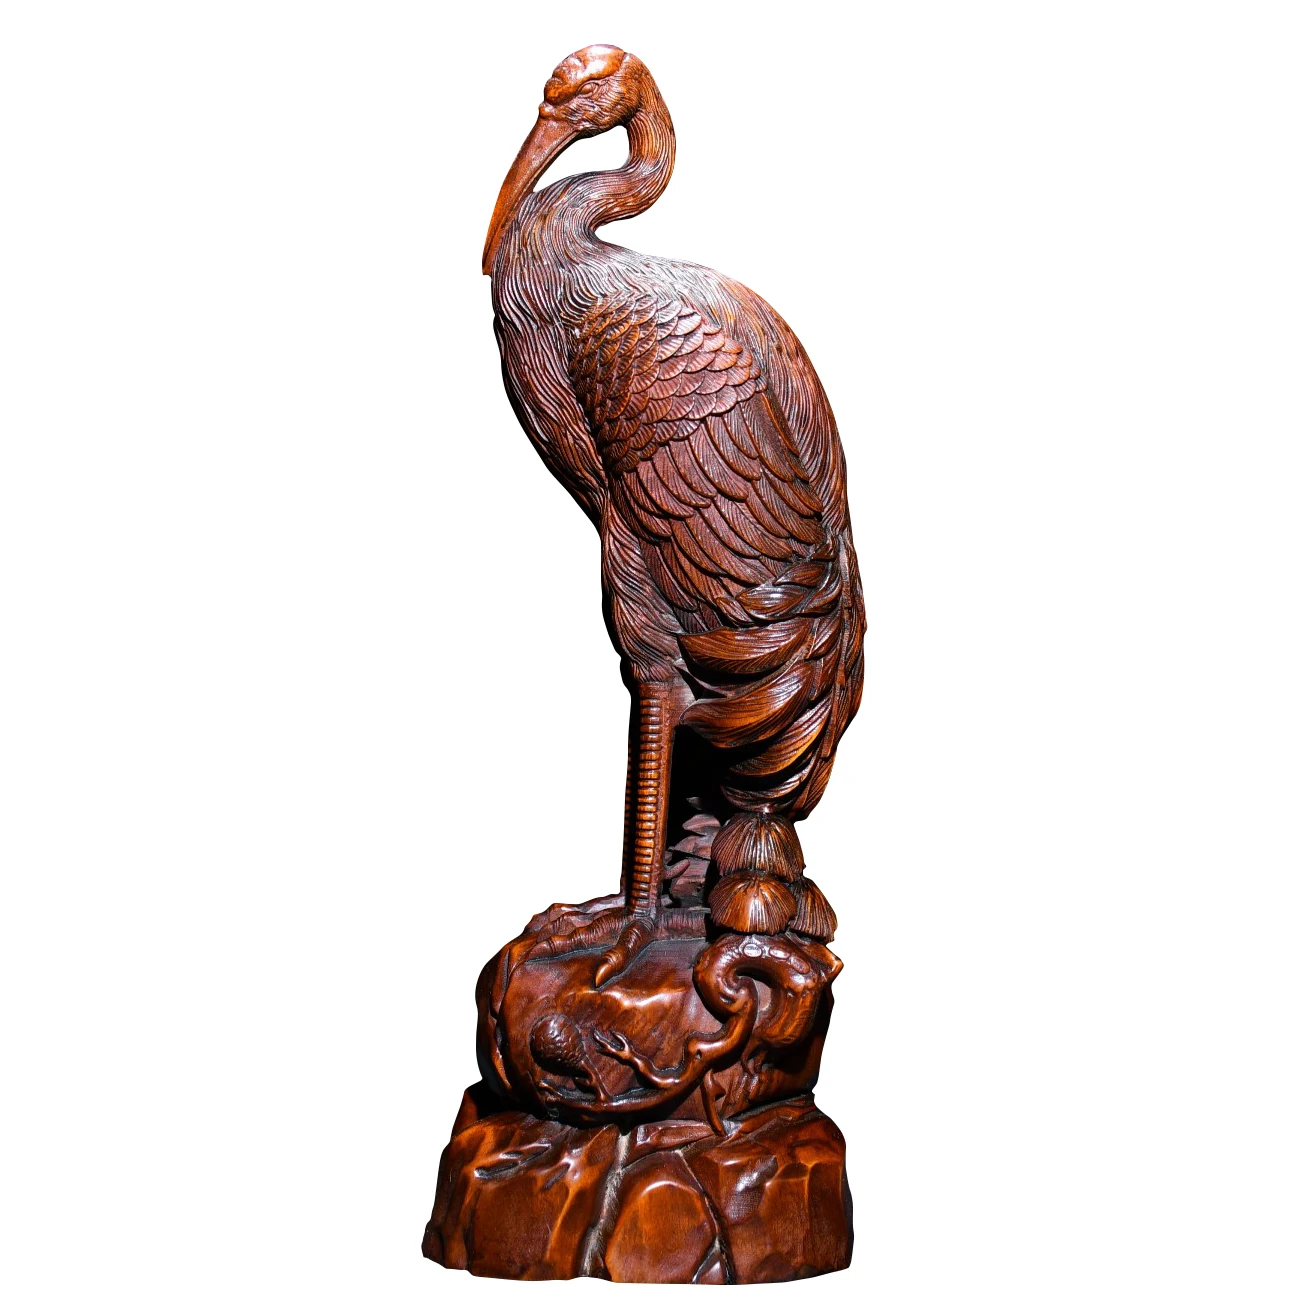 

chinese wood carving wooden carved crane statues indoor home decor Heron sculpture Figurines figurines for interior Decoration